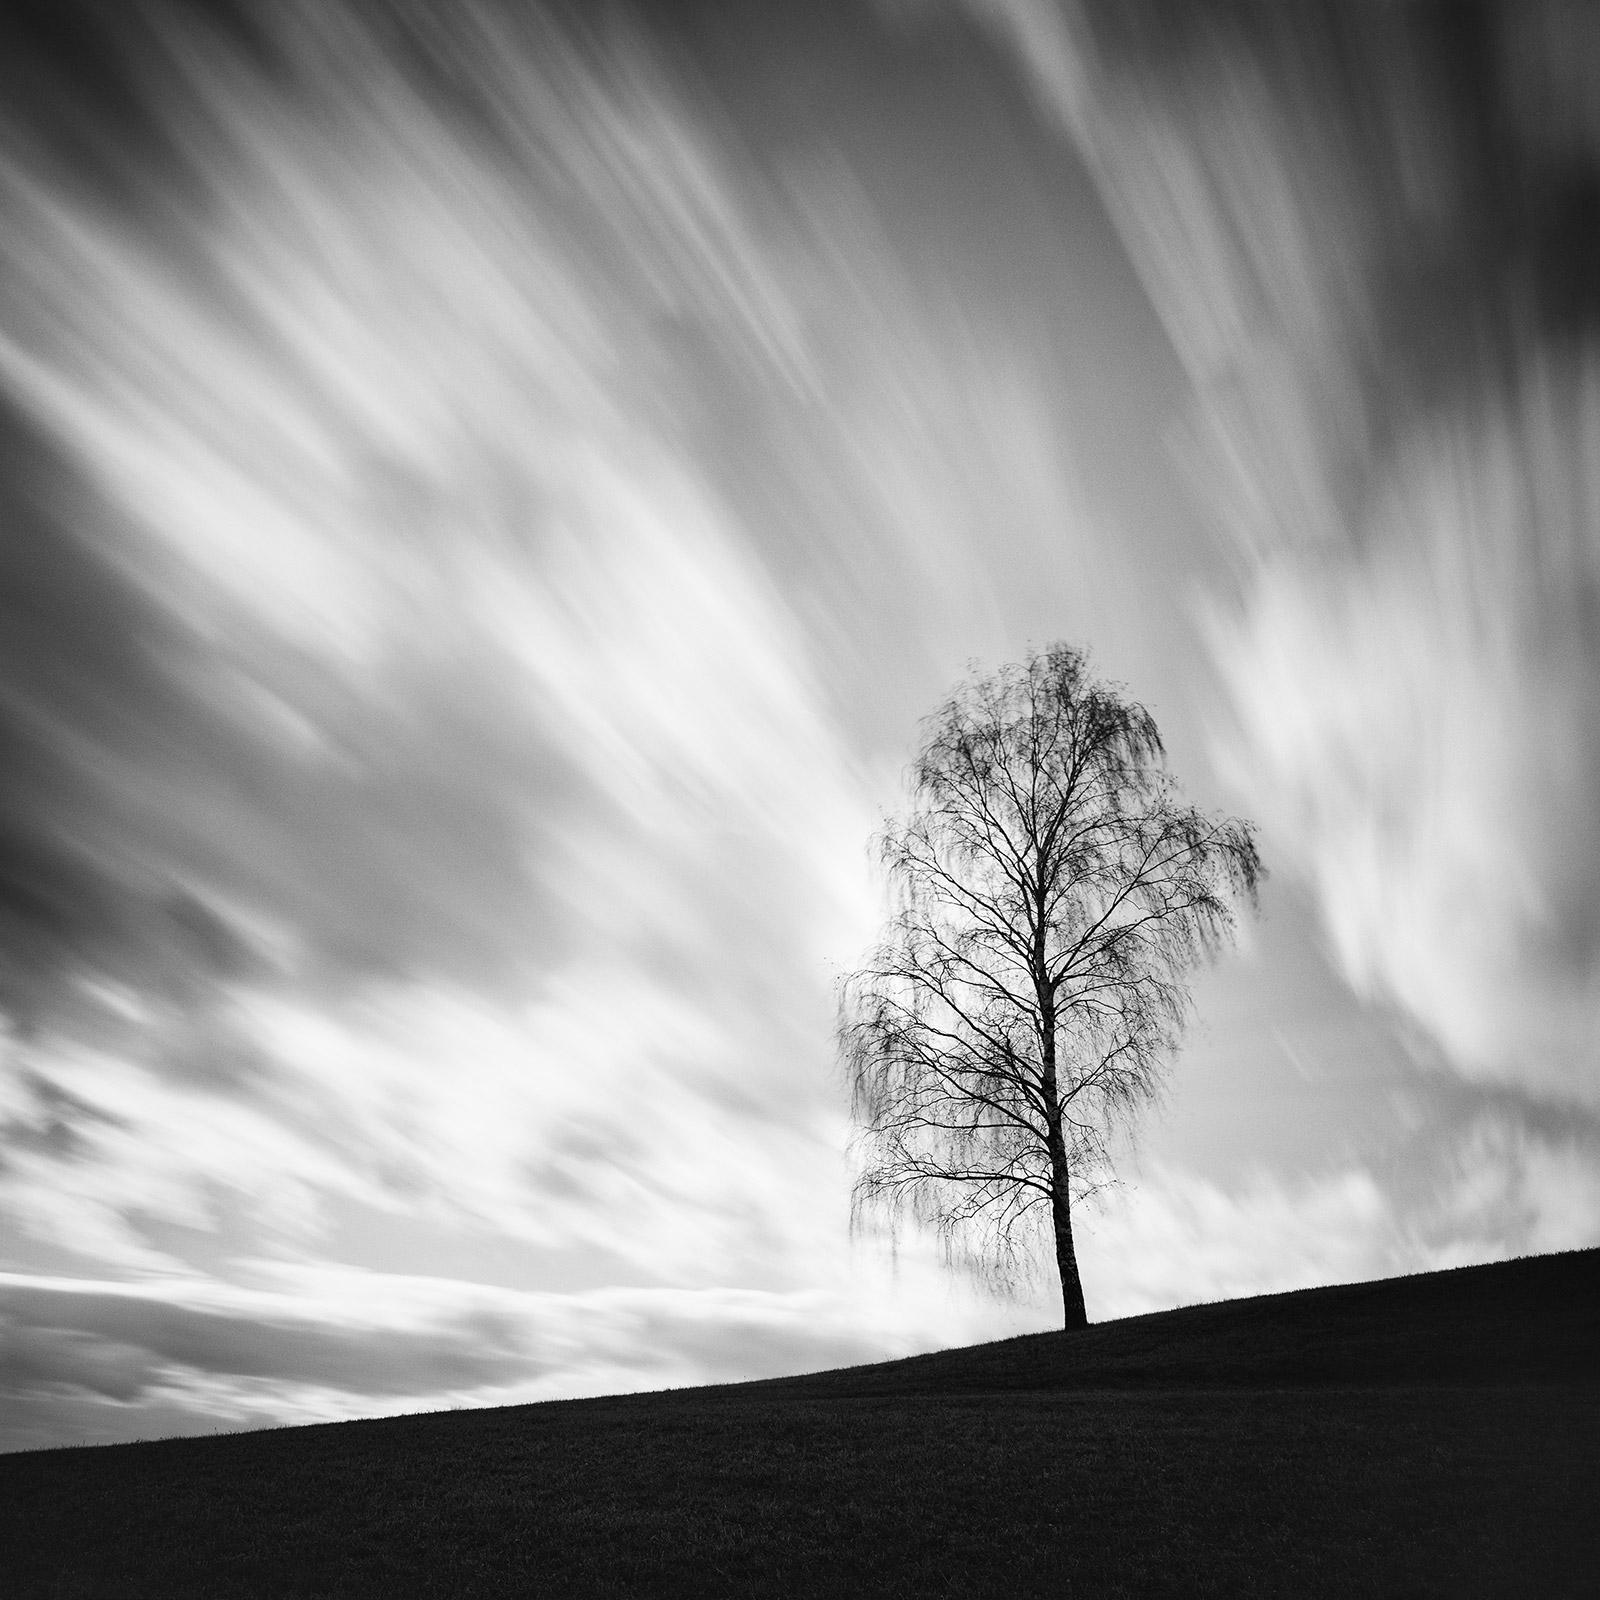 Gerald Berghammer Black and White Photograph - Black Birch, Austria, contemporary art black and white photography, landscape